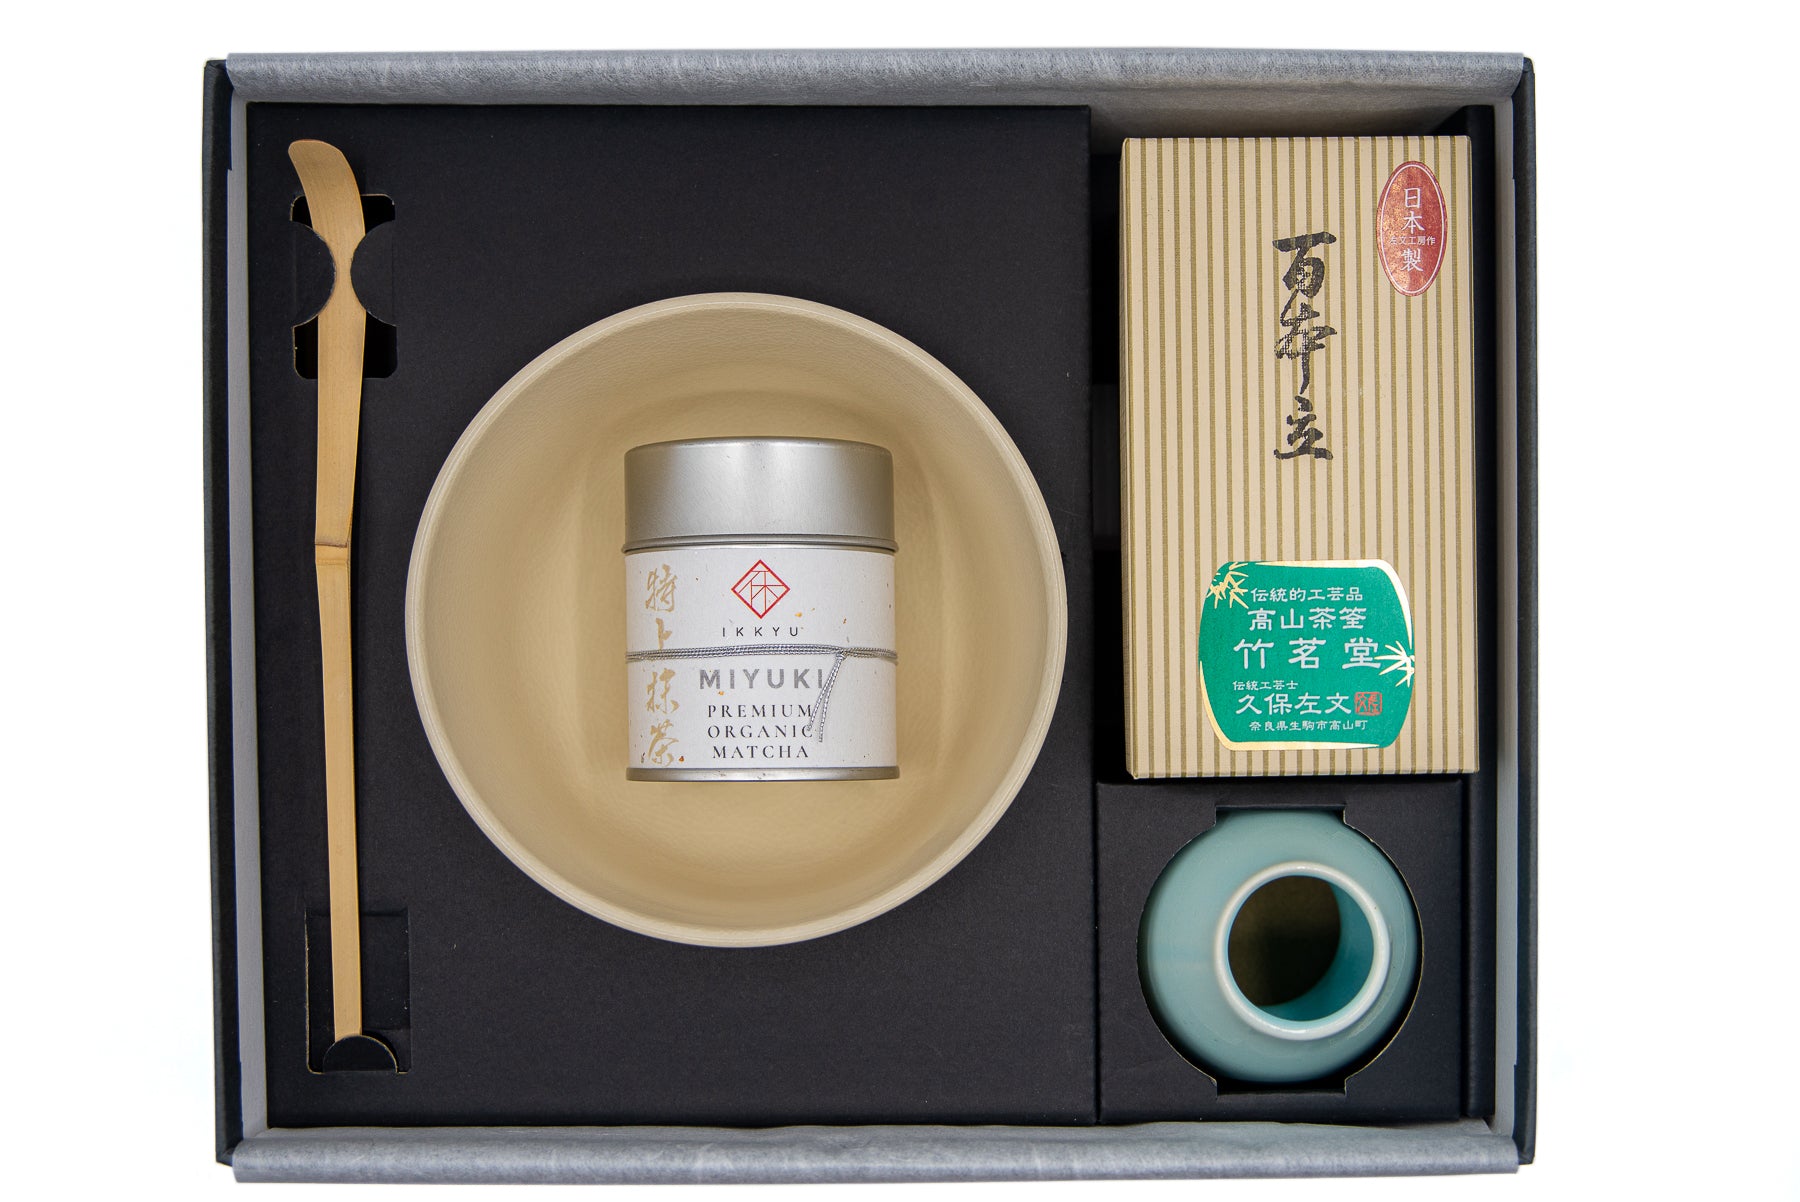 Helen's Asian Kitchen Matcha Tea Gift Set for Making Traditional Matcha  Tea, 5-Piece Set with Preparation Instructions 